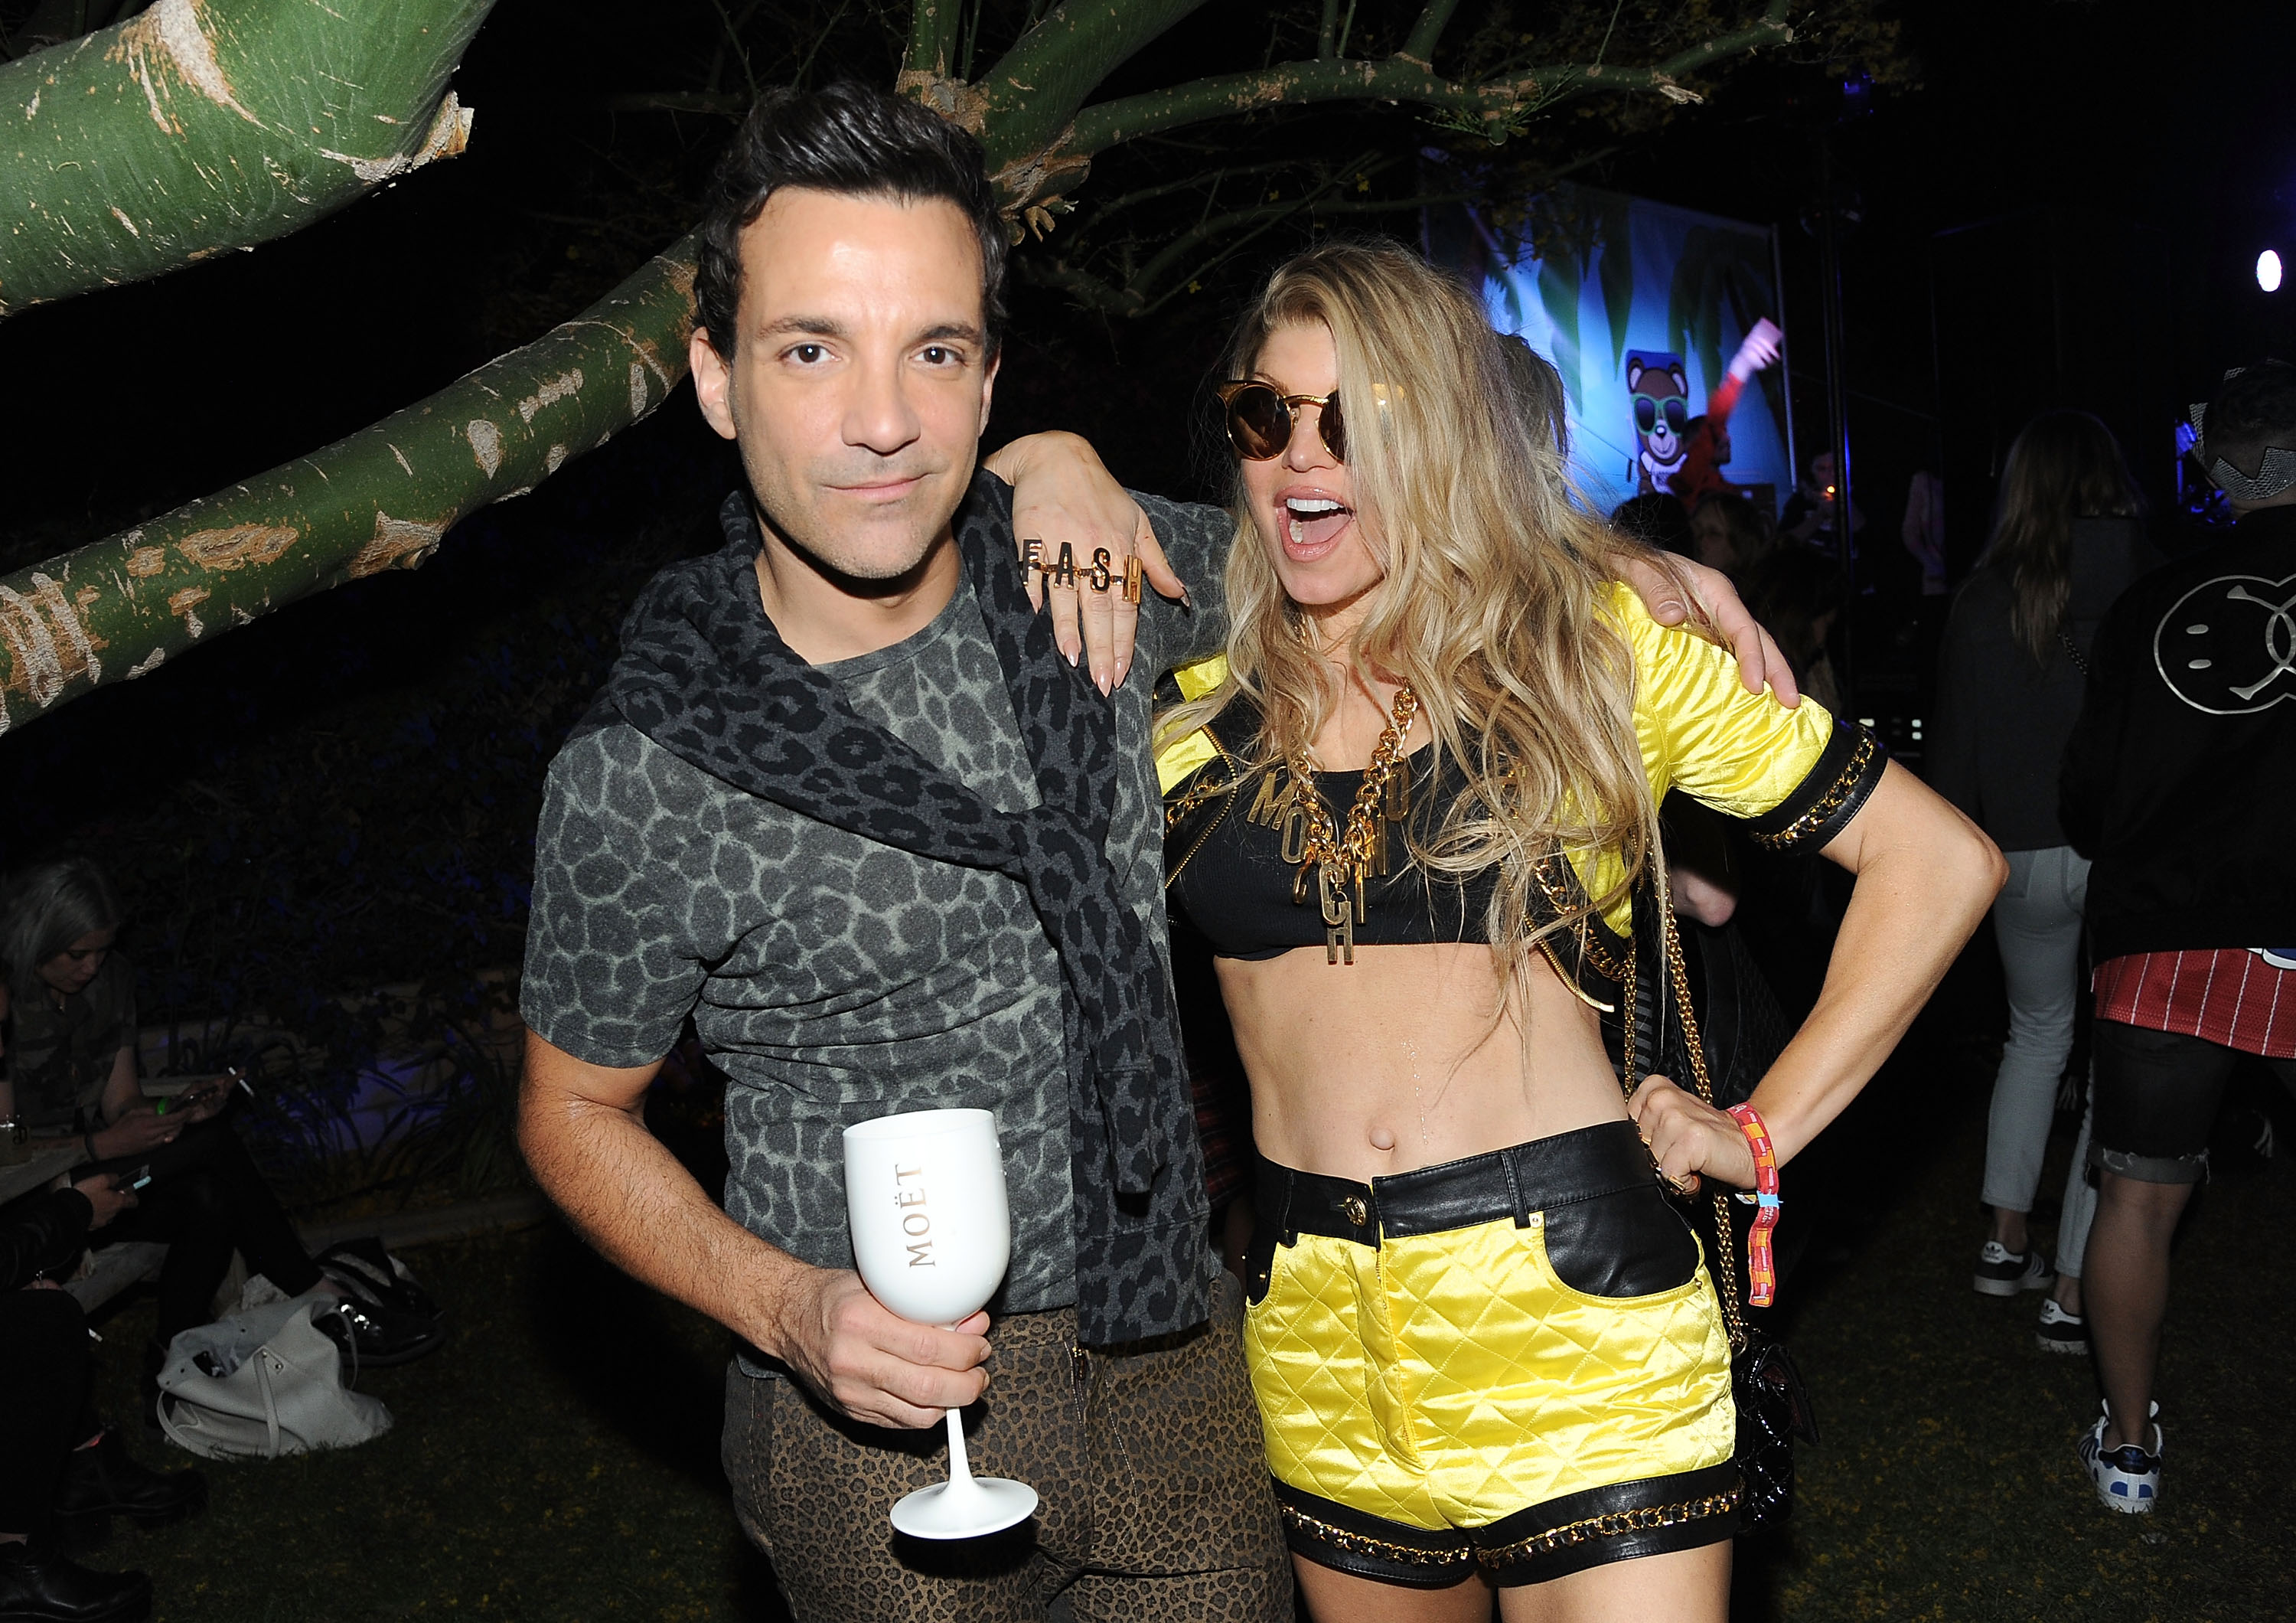 George Kotsiopoulos and singer Fergie enjoying Moet Ice Imperial at Moschino's Late Night hosted by Jeremy Scott at Coachella 2015